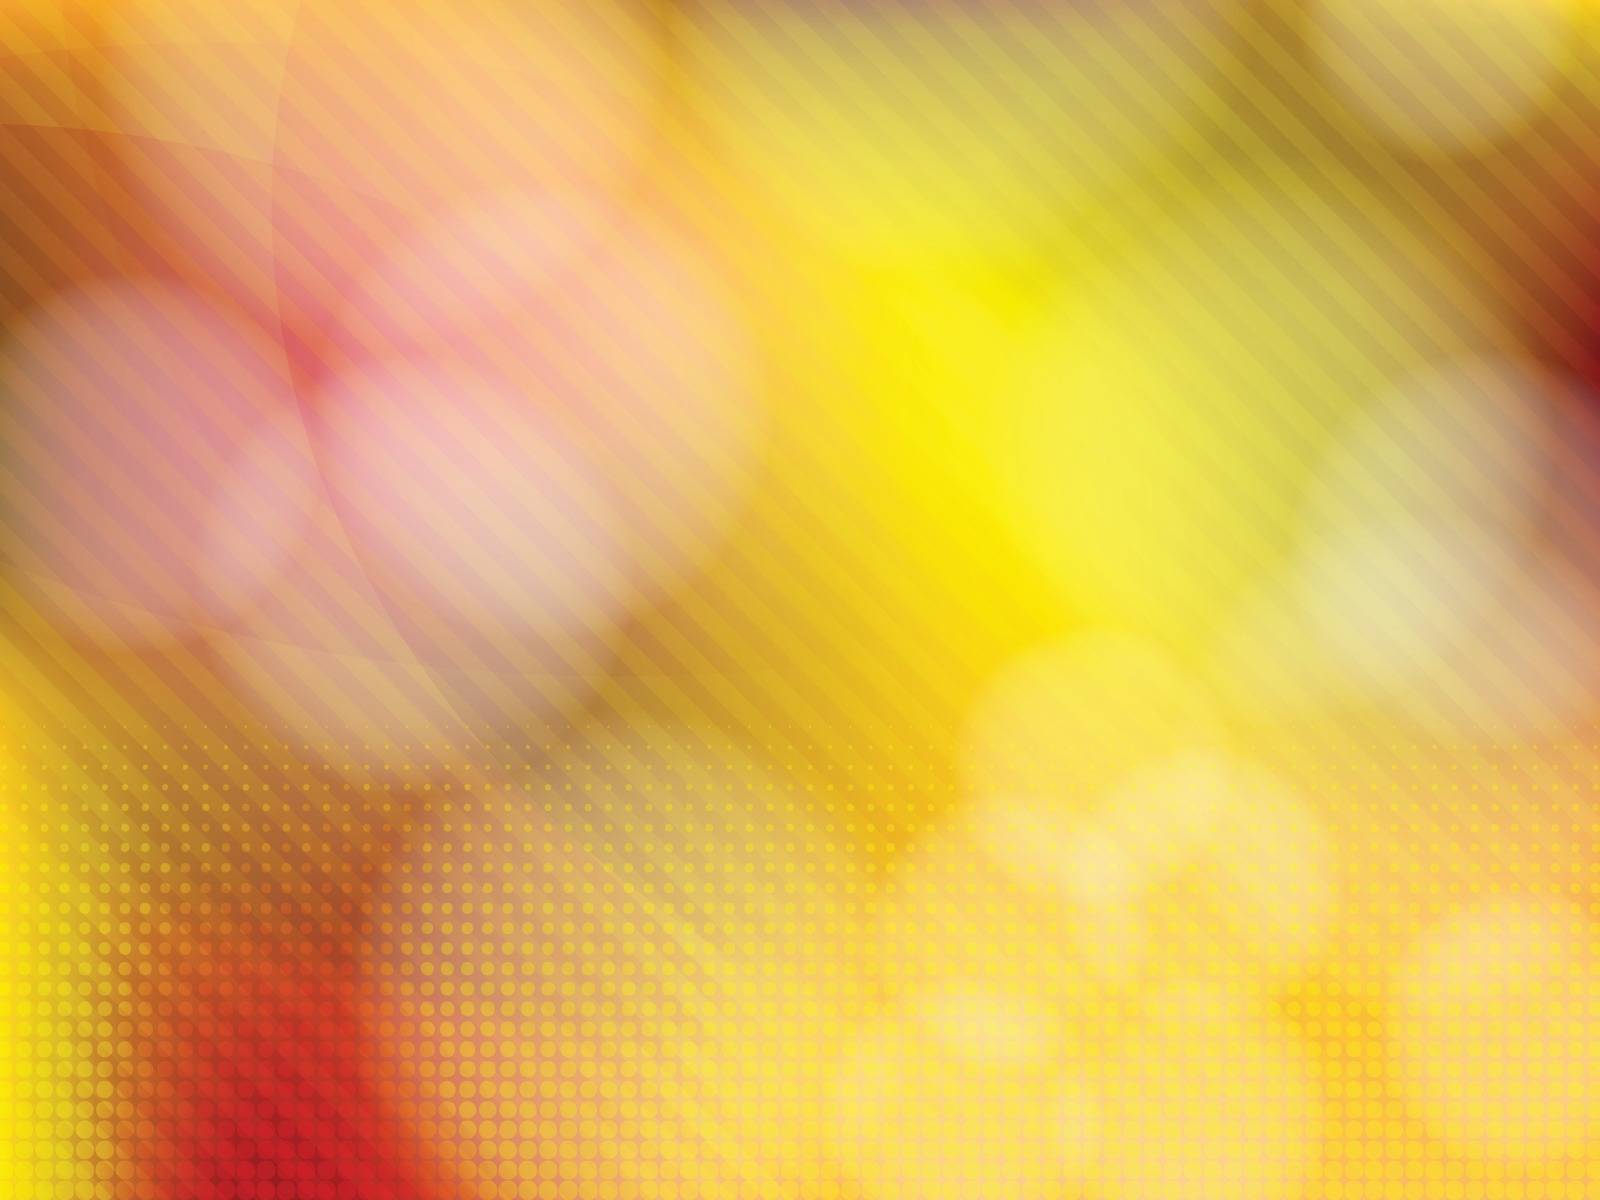 Defocused background with lights. Blurred backdrop. Abstract bokeh style vector illustration.